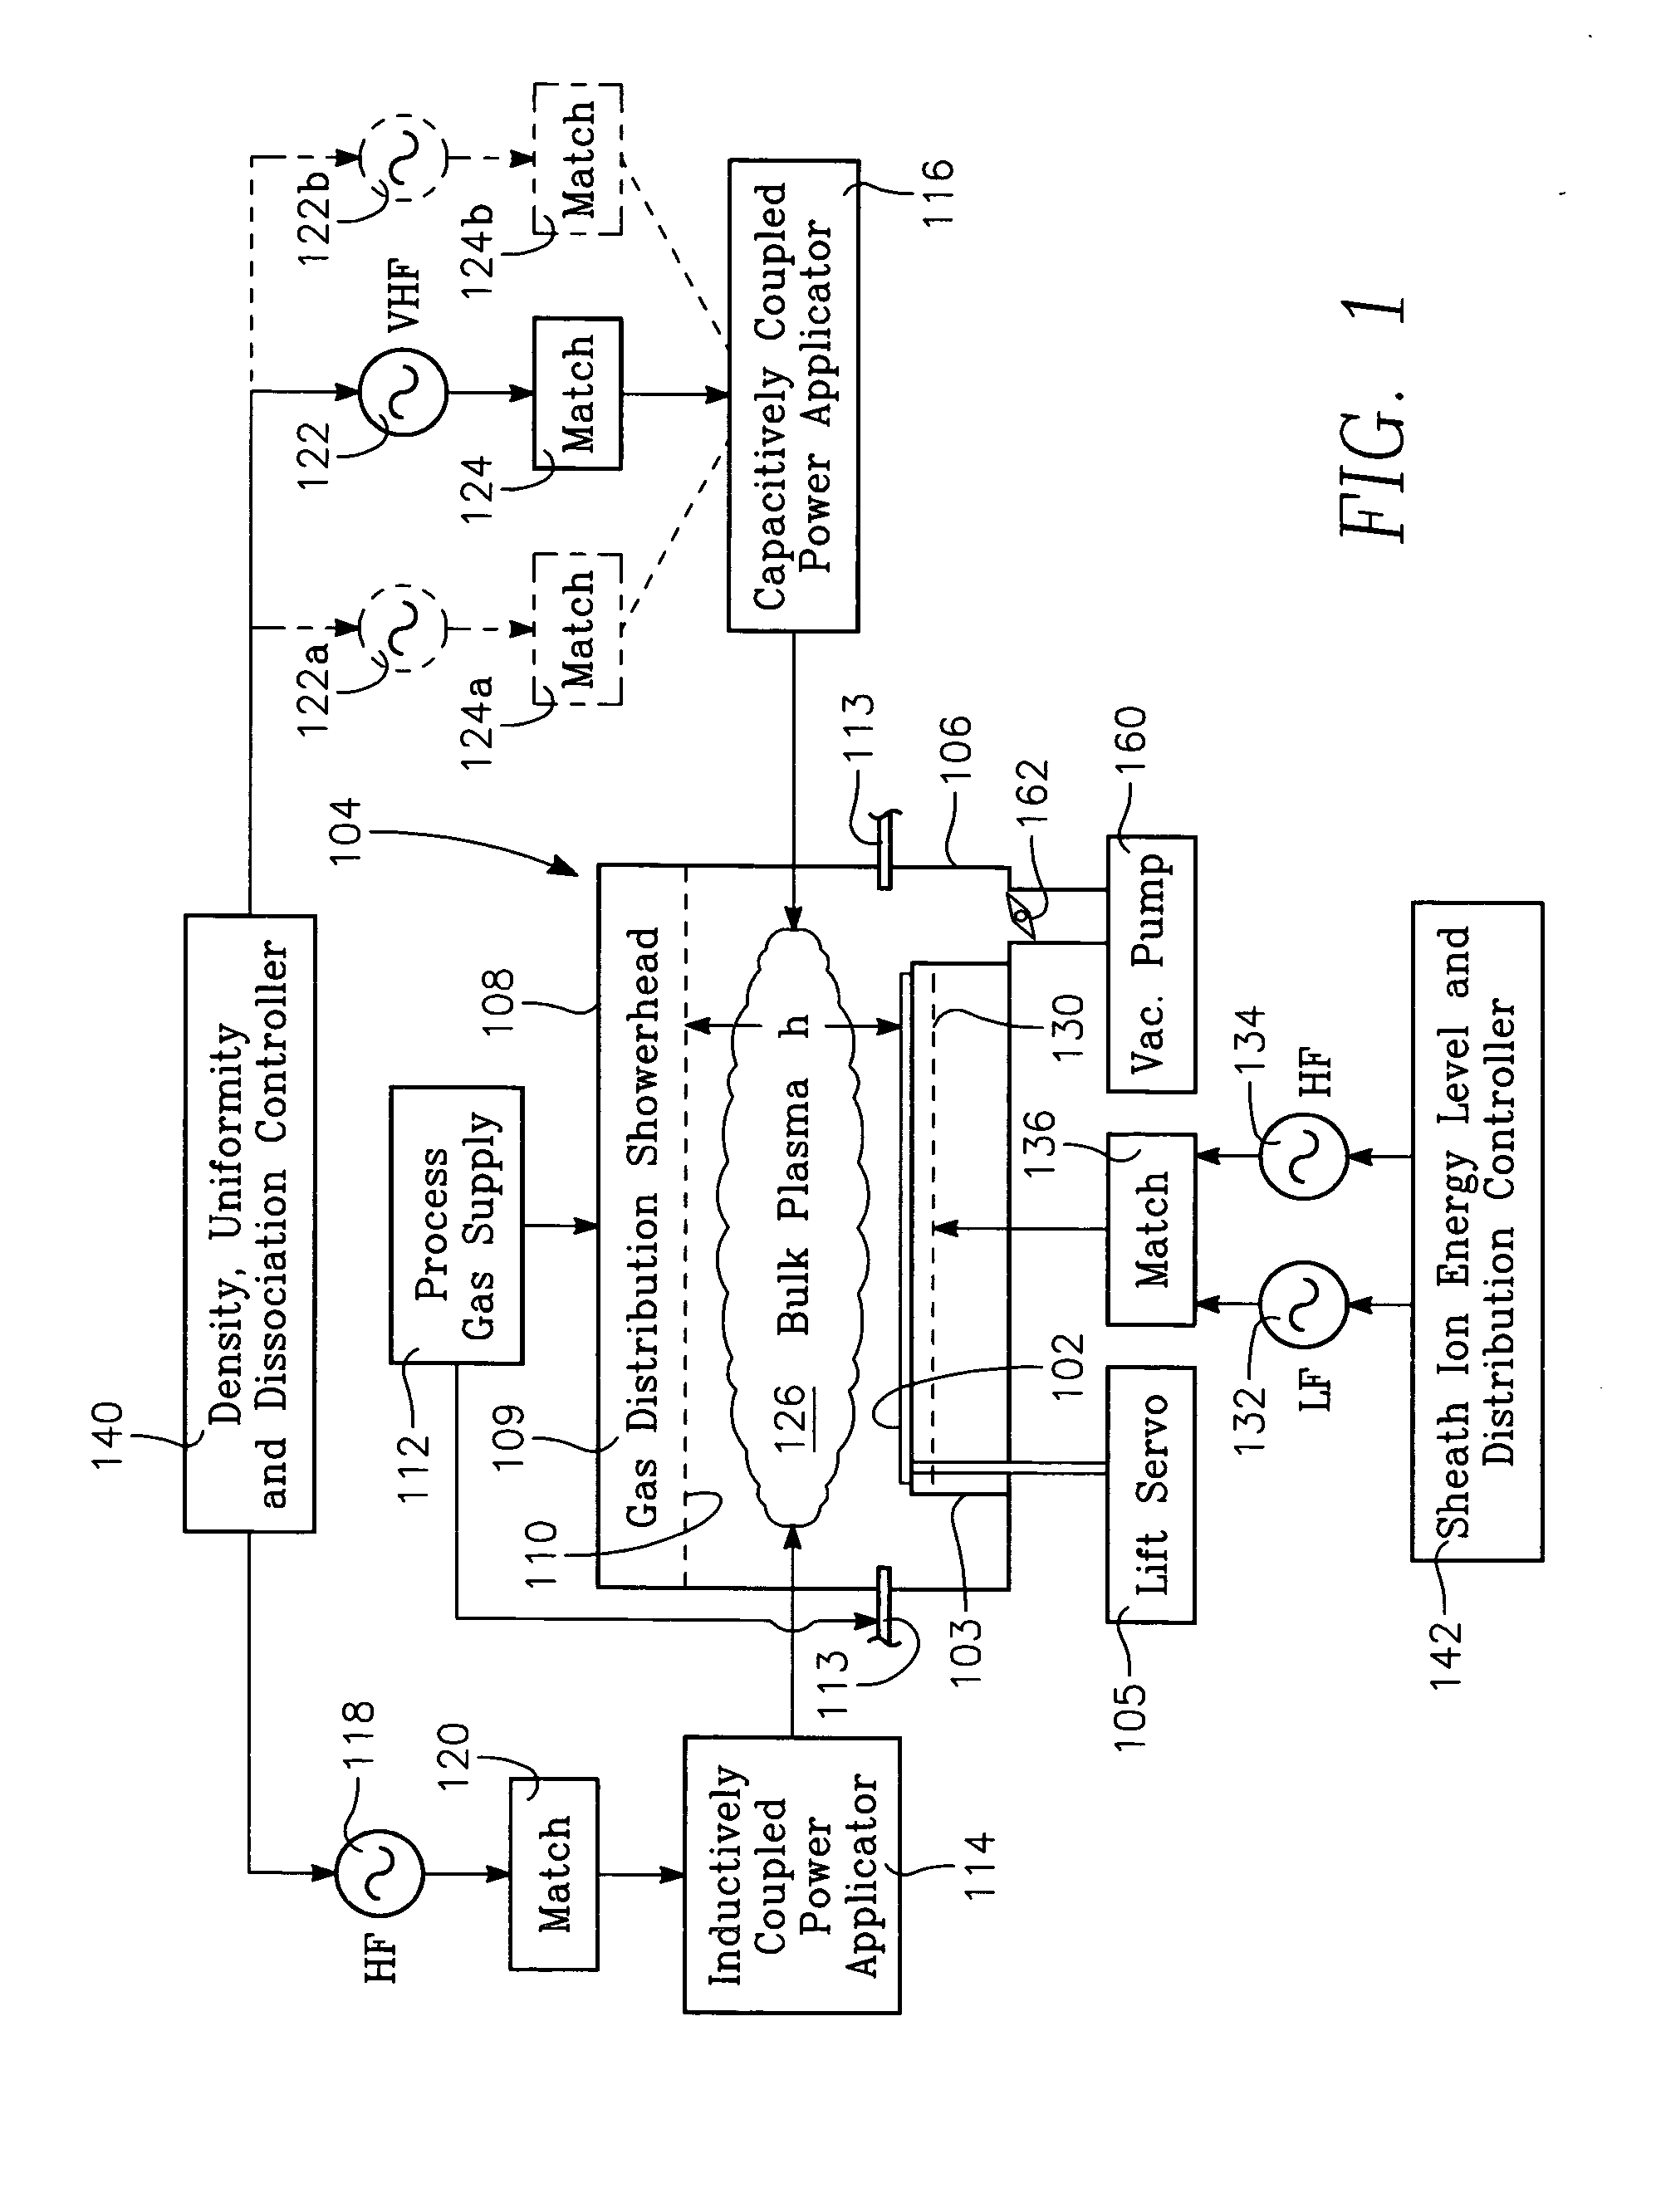 Process using combined capacitively and inductively coupled plasma sources for controlling plasma ion density